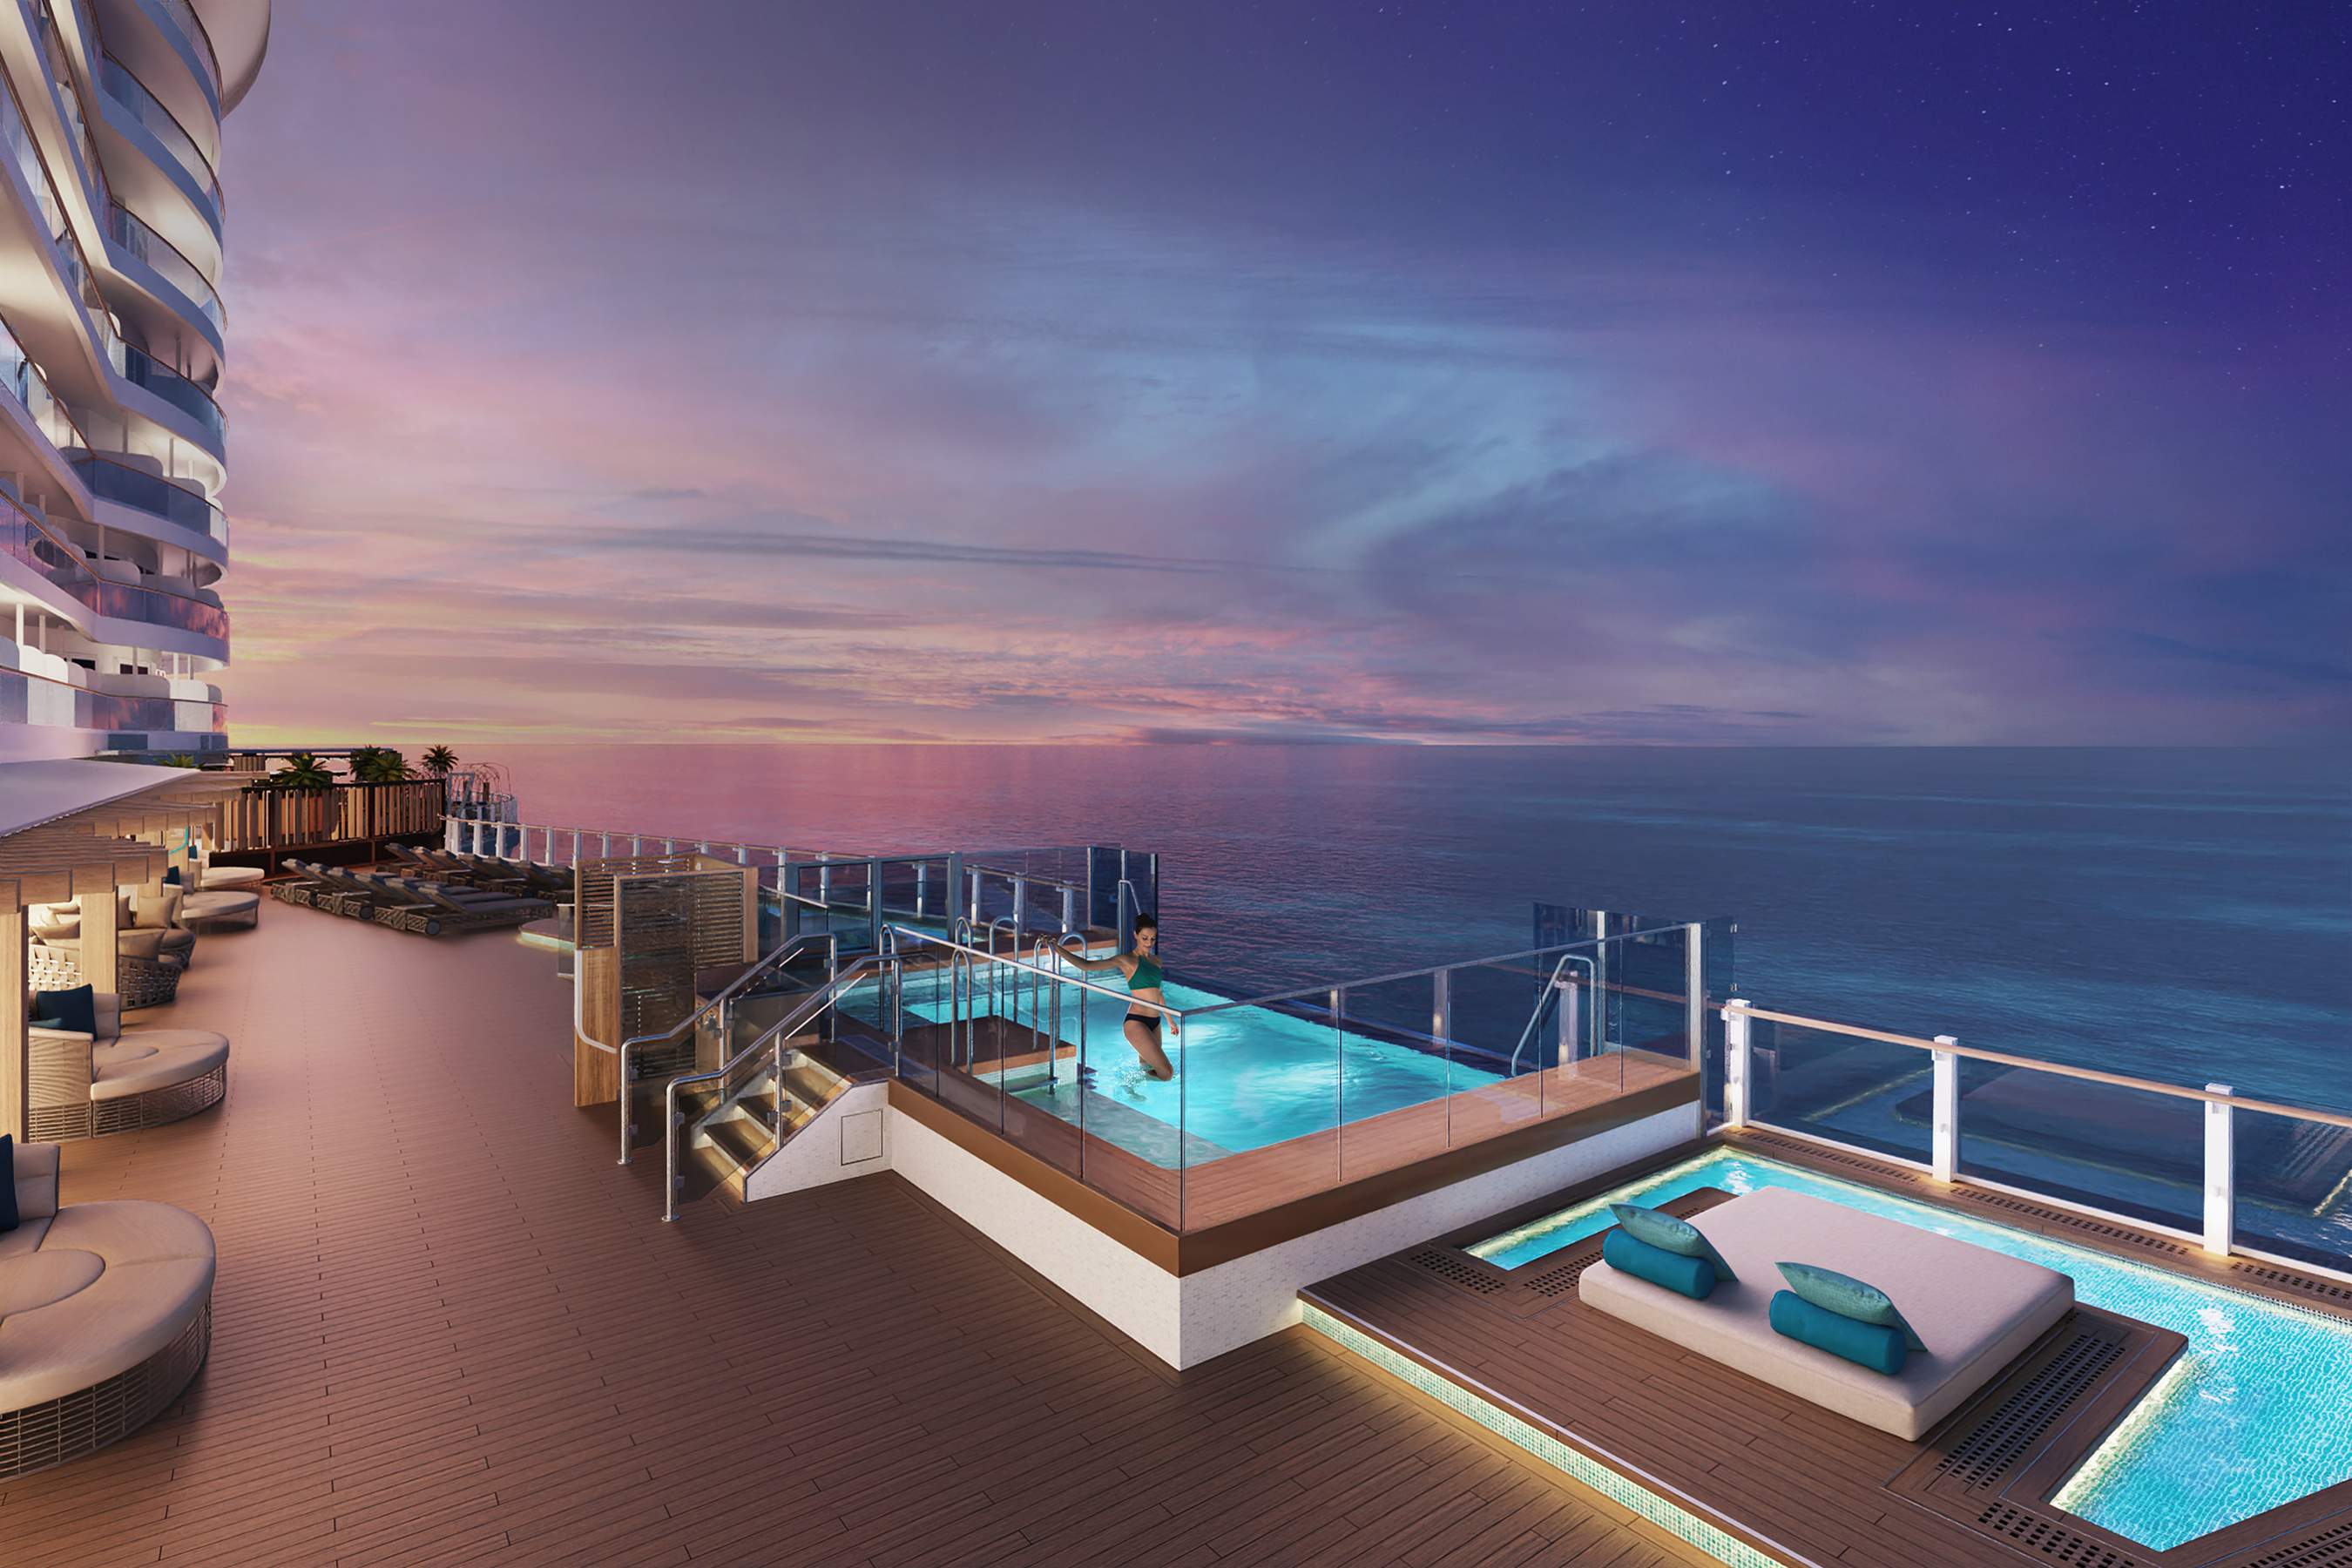 Guests can relax and enjoy the stunning views on the expansive pool decks at Infinity Beach on Norwegian Viva.